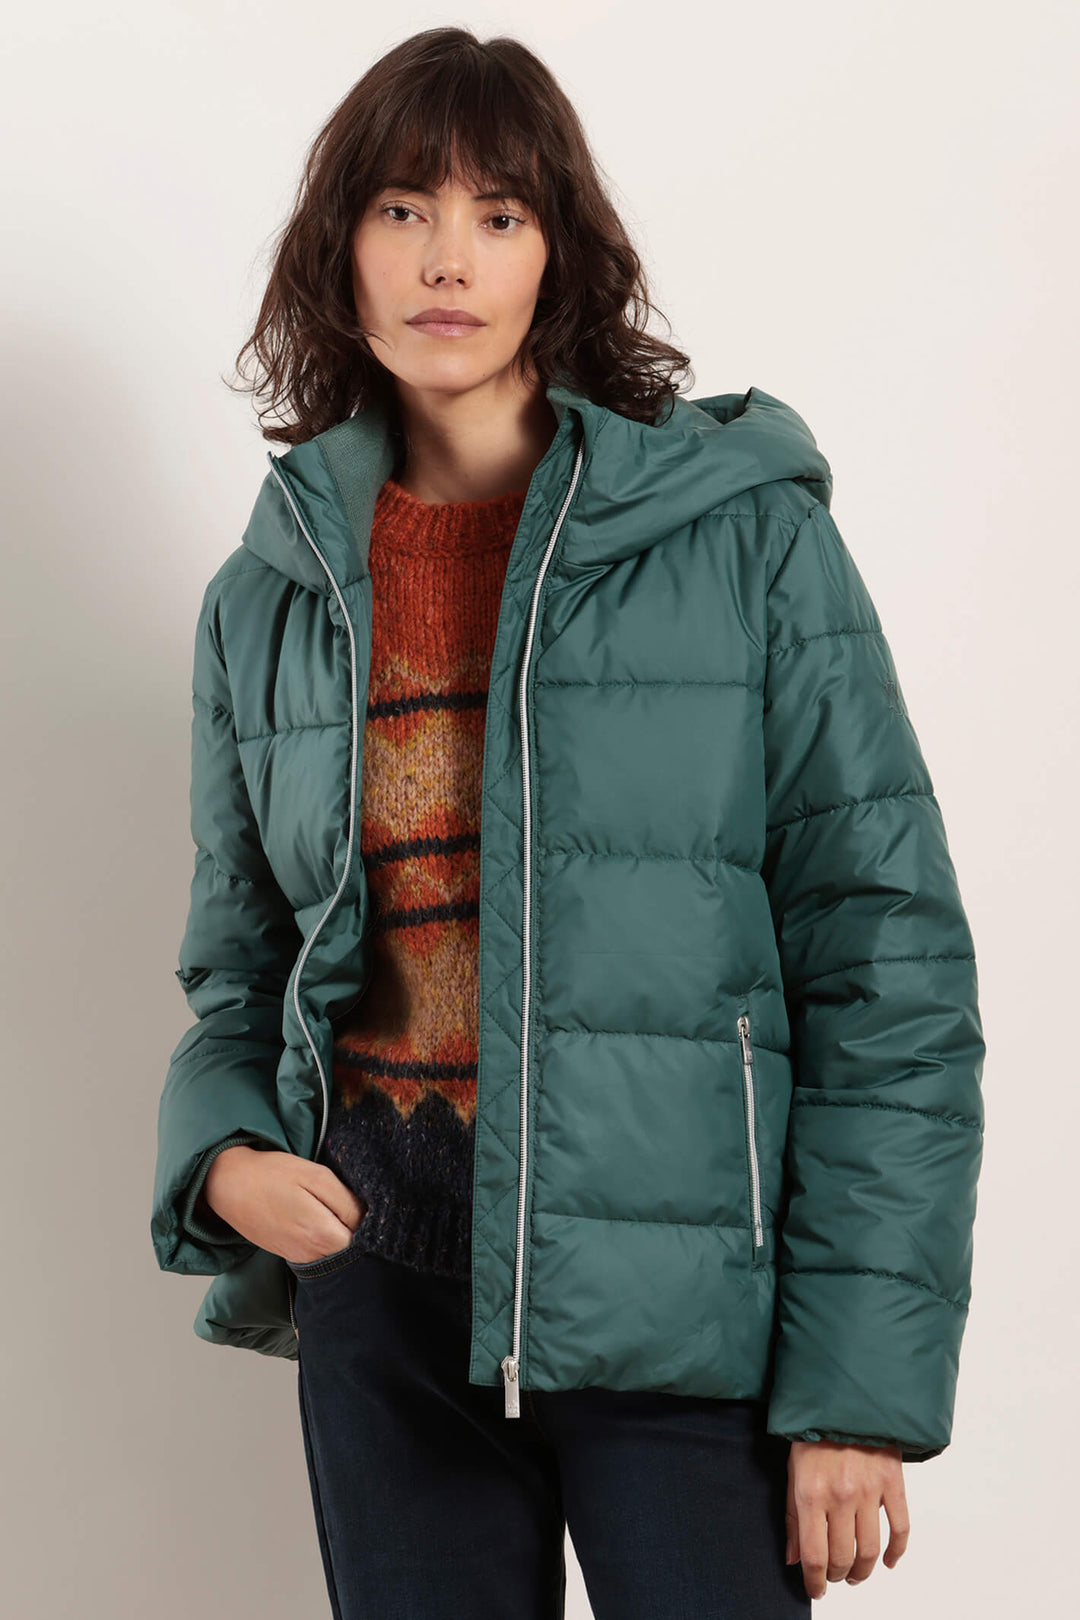 Mat De Misaine Fuga 094 Pin Maritime Green Padded Jacket With Hood - Shirley Allum Boutique